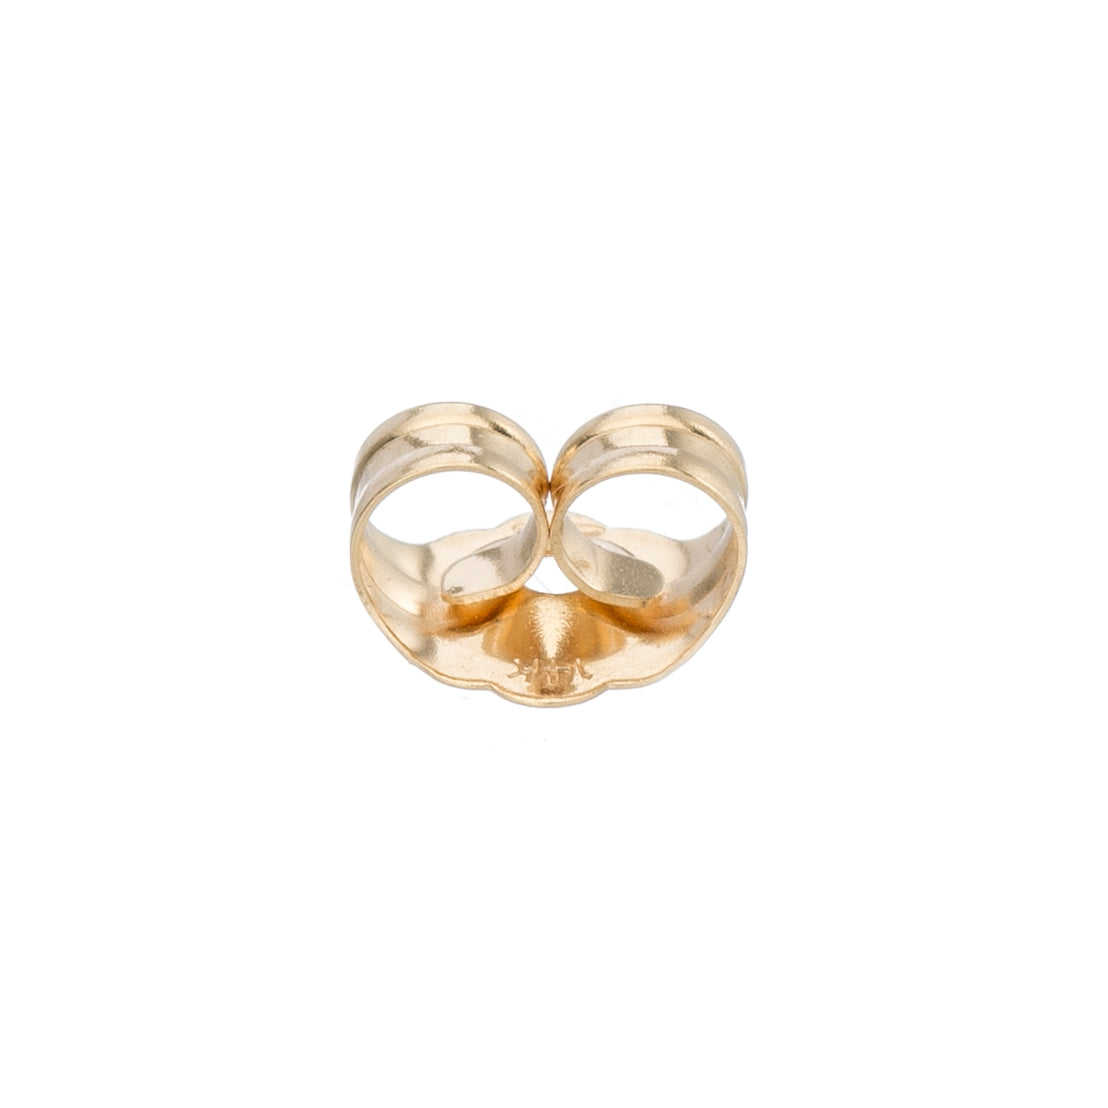 Large Sterling Silver Earring Back Replacement Pair Gold-Plated